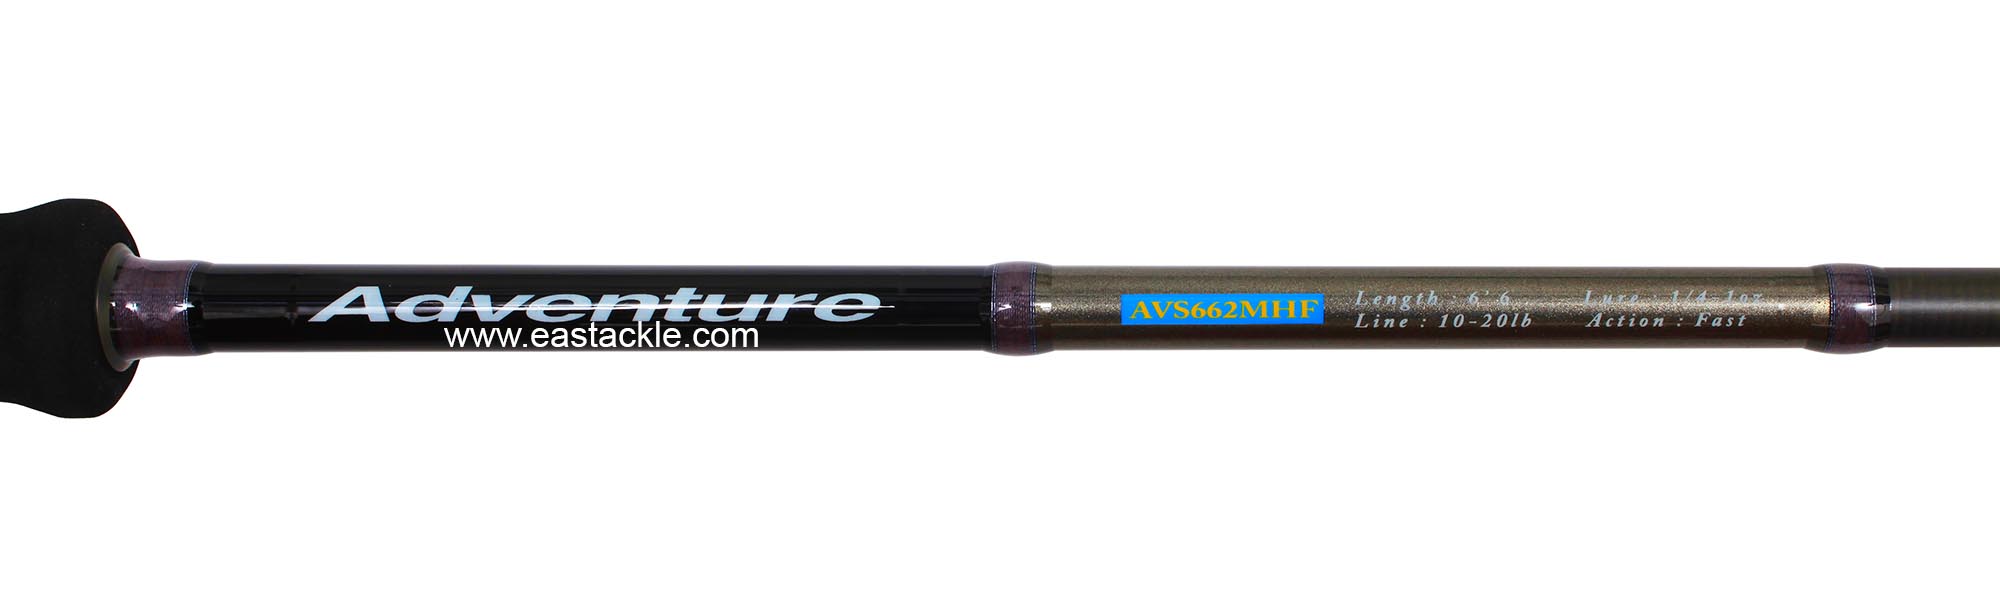 Storm - Adventure AVS662MHF - Spinning Rod - Blank Specifications (Top View) | Eastackle